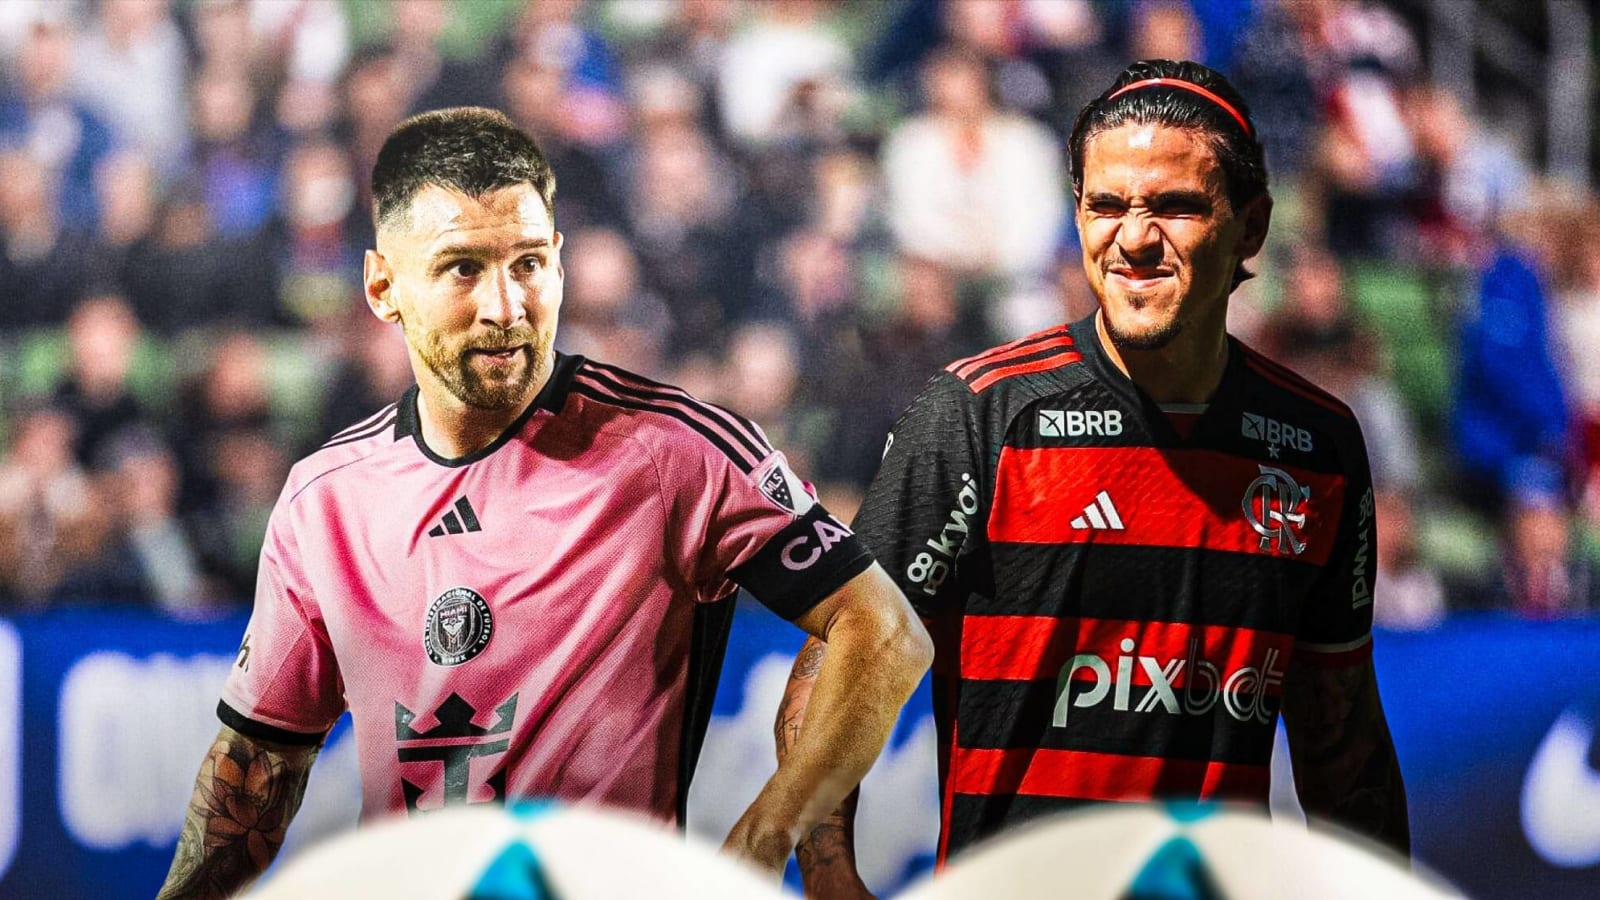 MLS fans hammer D.C United star for ’embarrassing’ moment with Lionel Messi